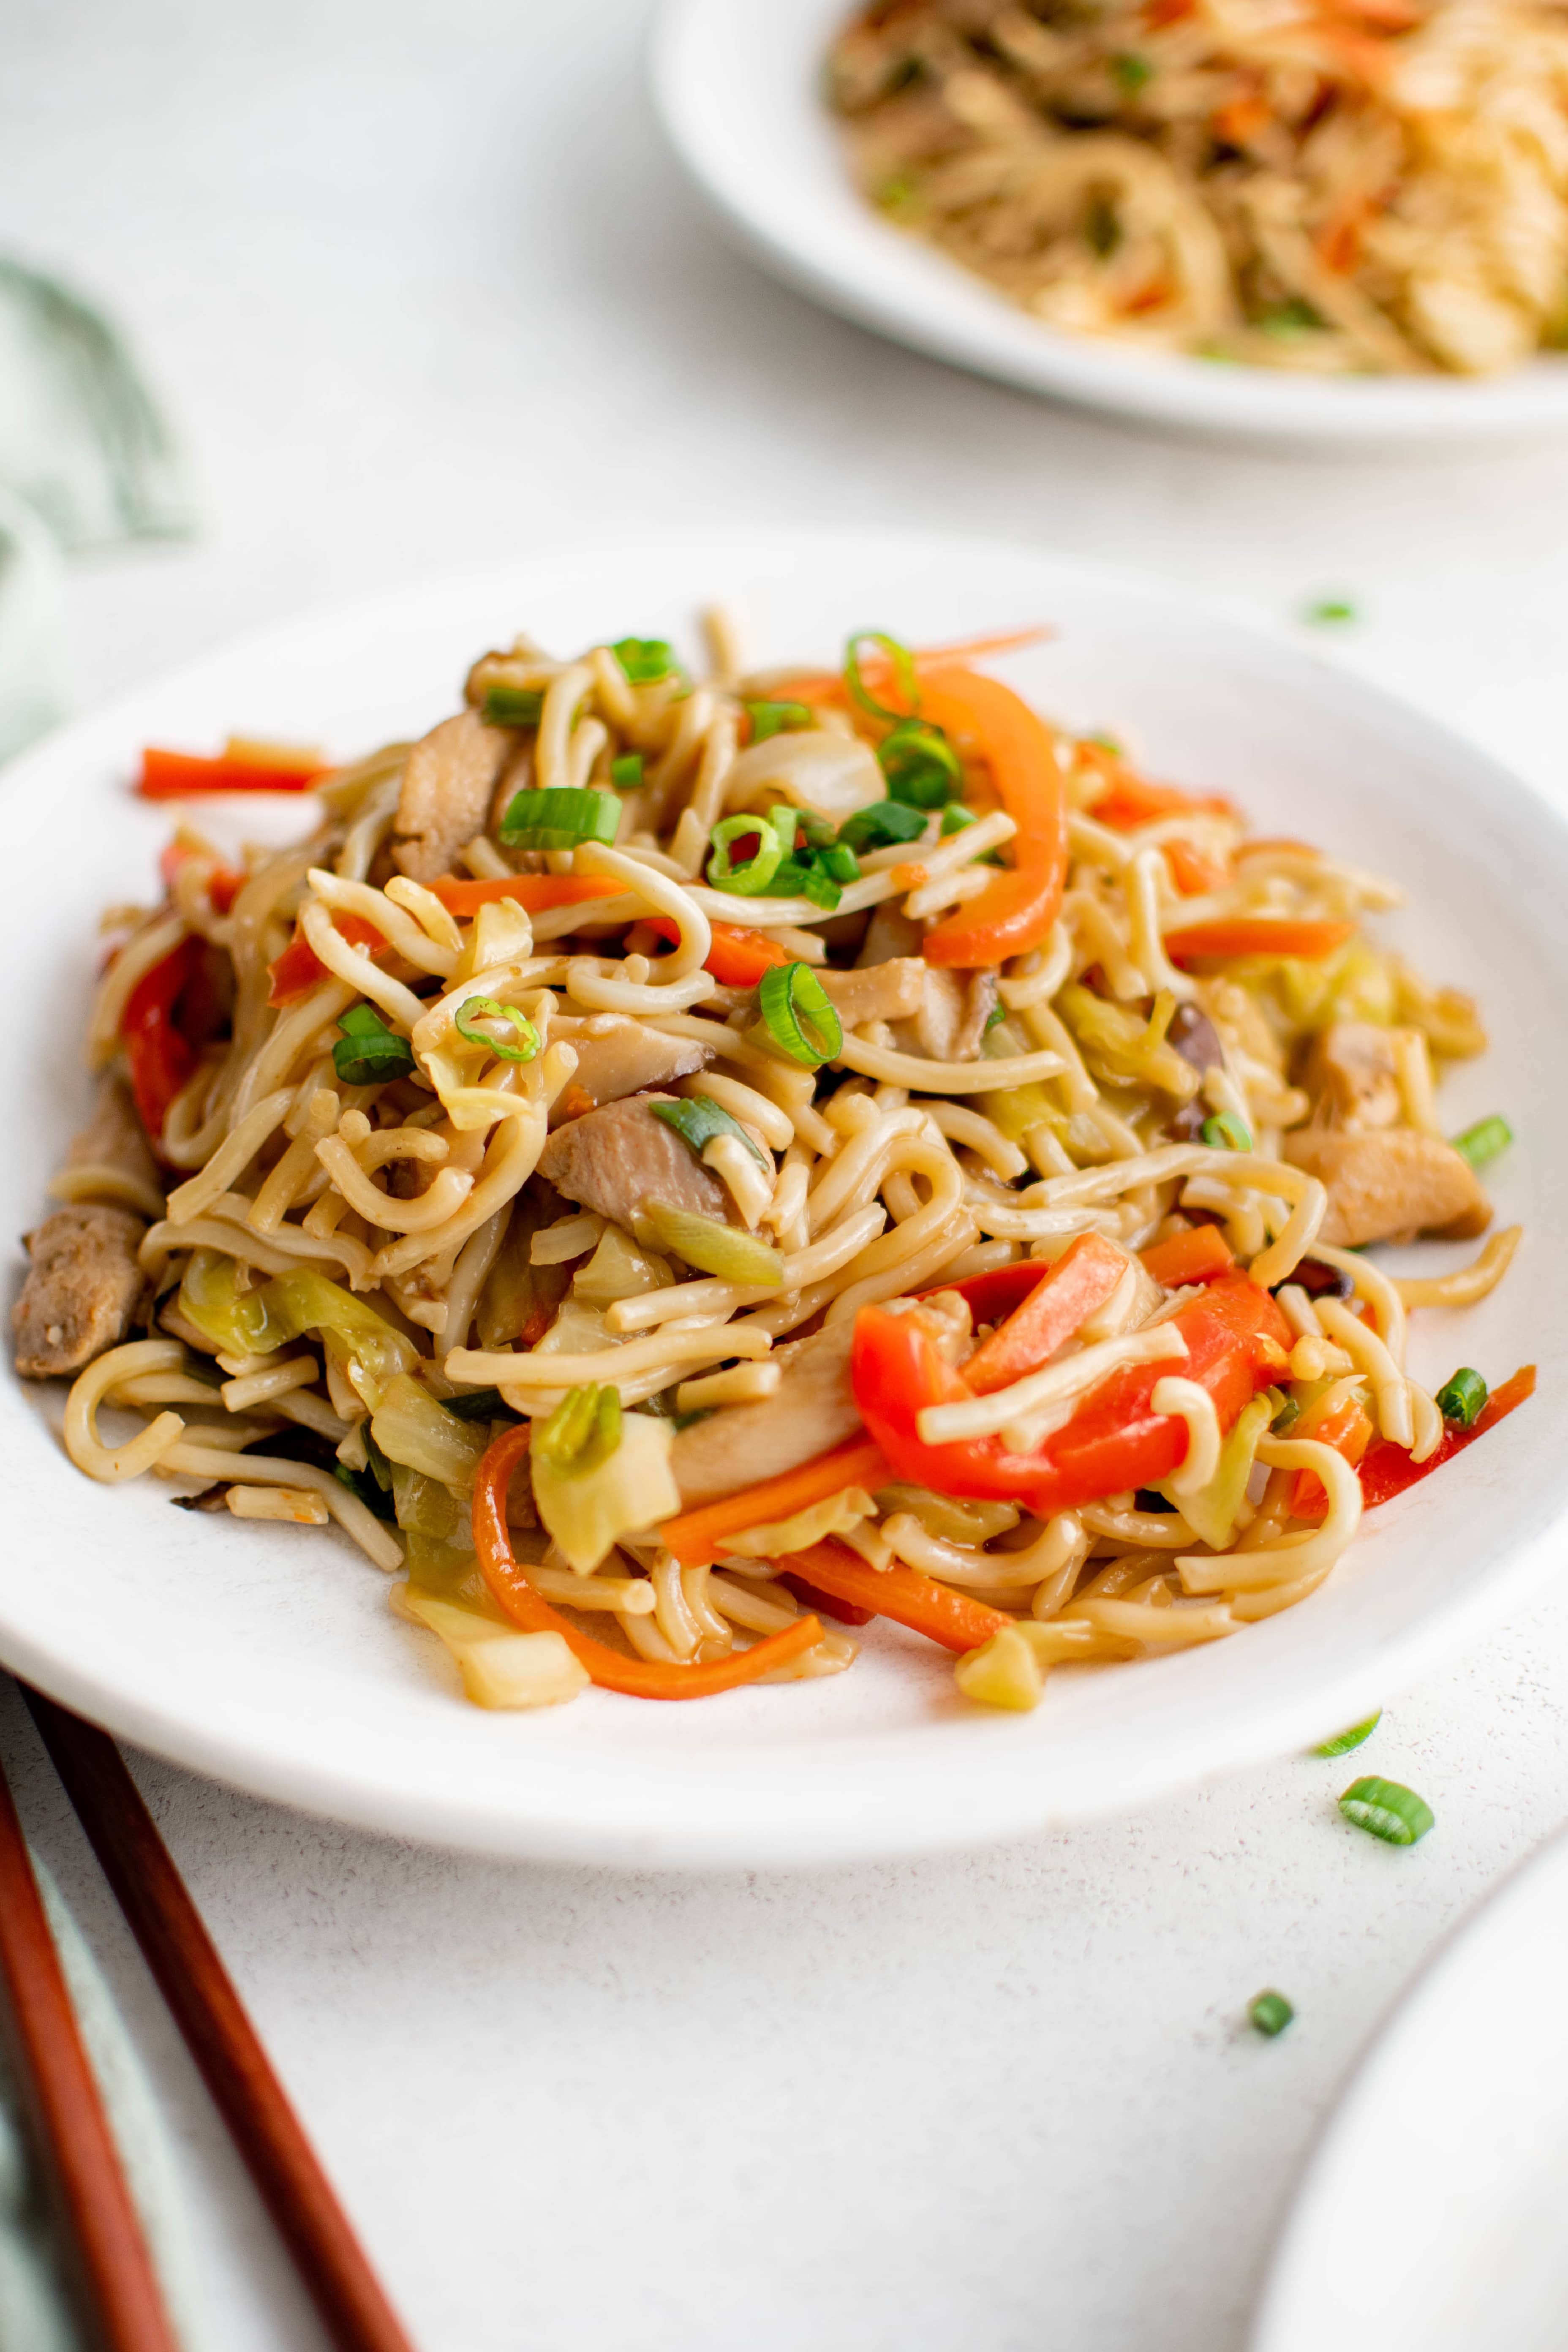 White plate filled with yakisoba noodles filled with vegetables and chicken.